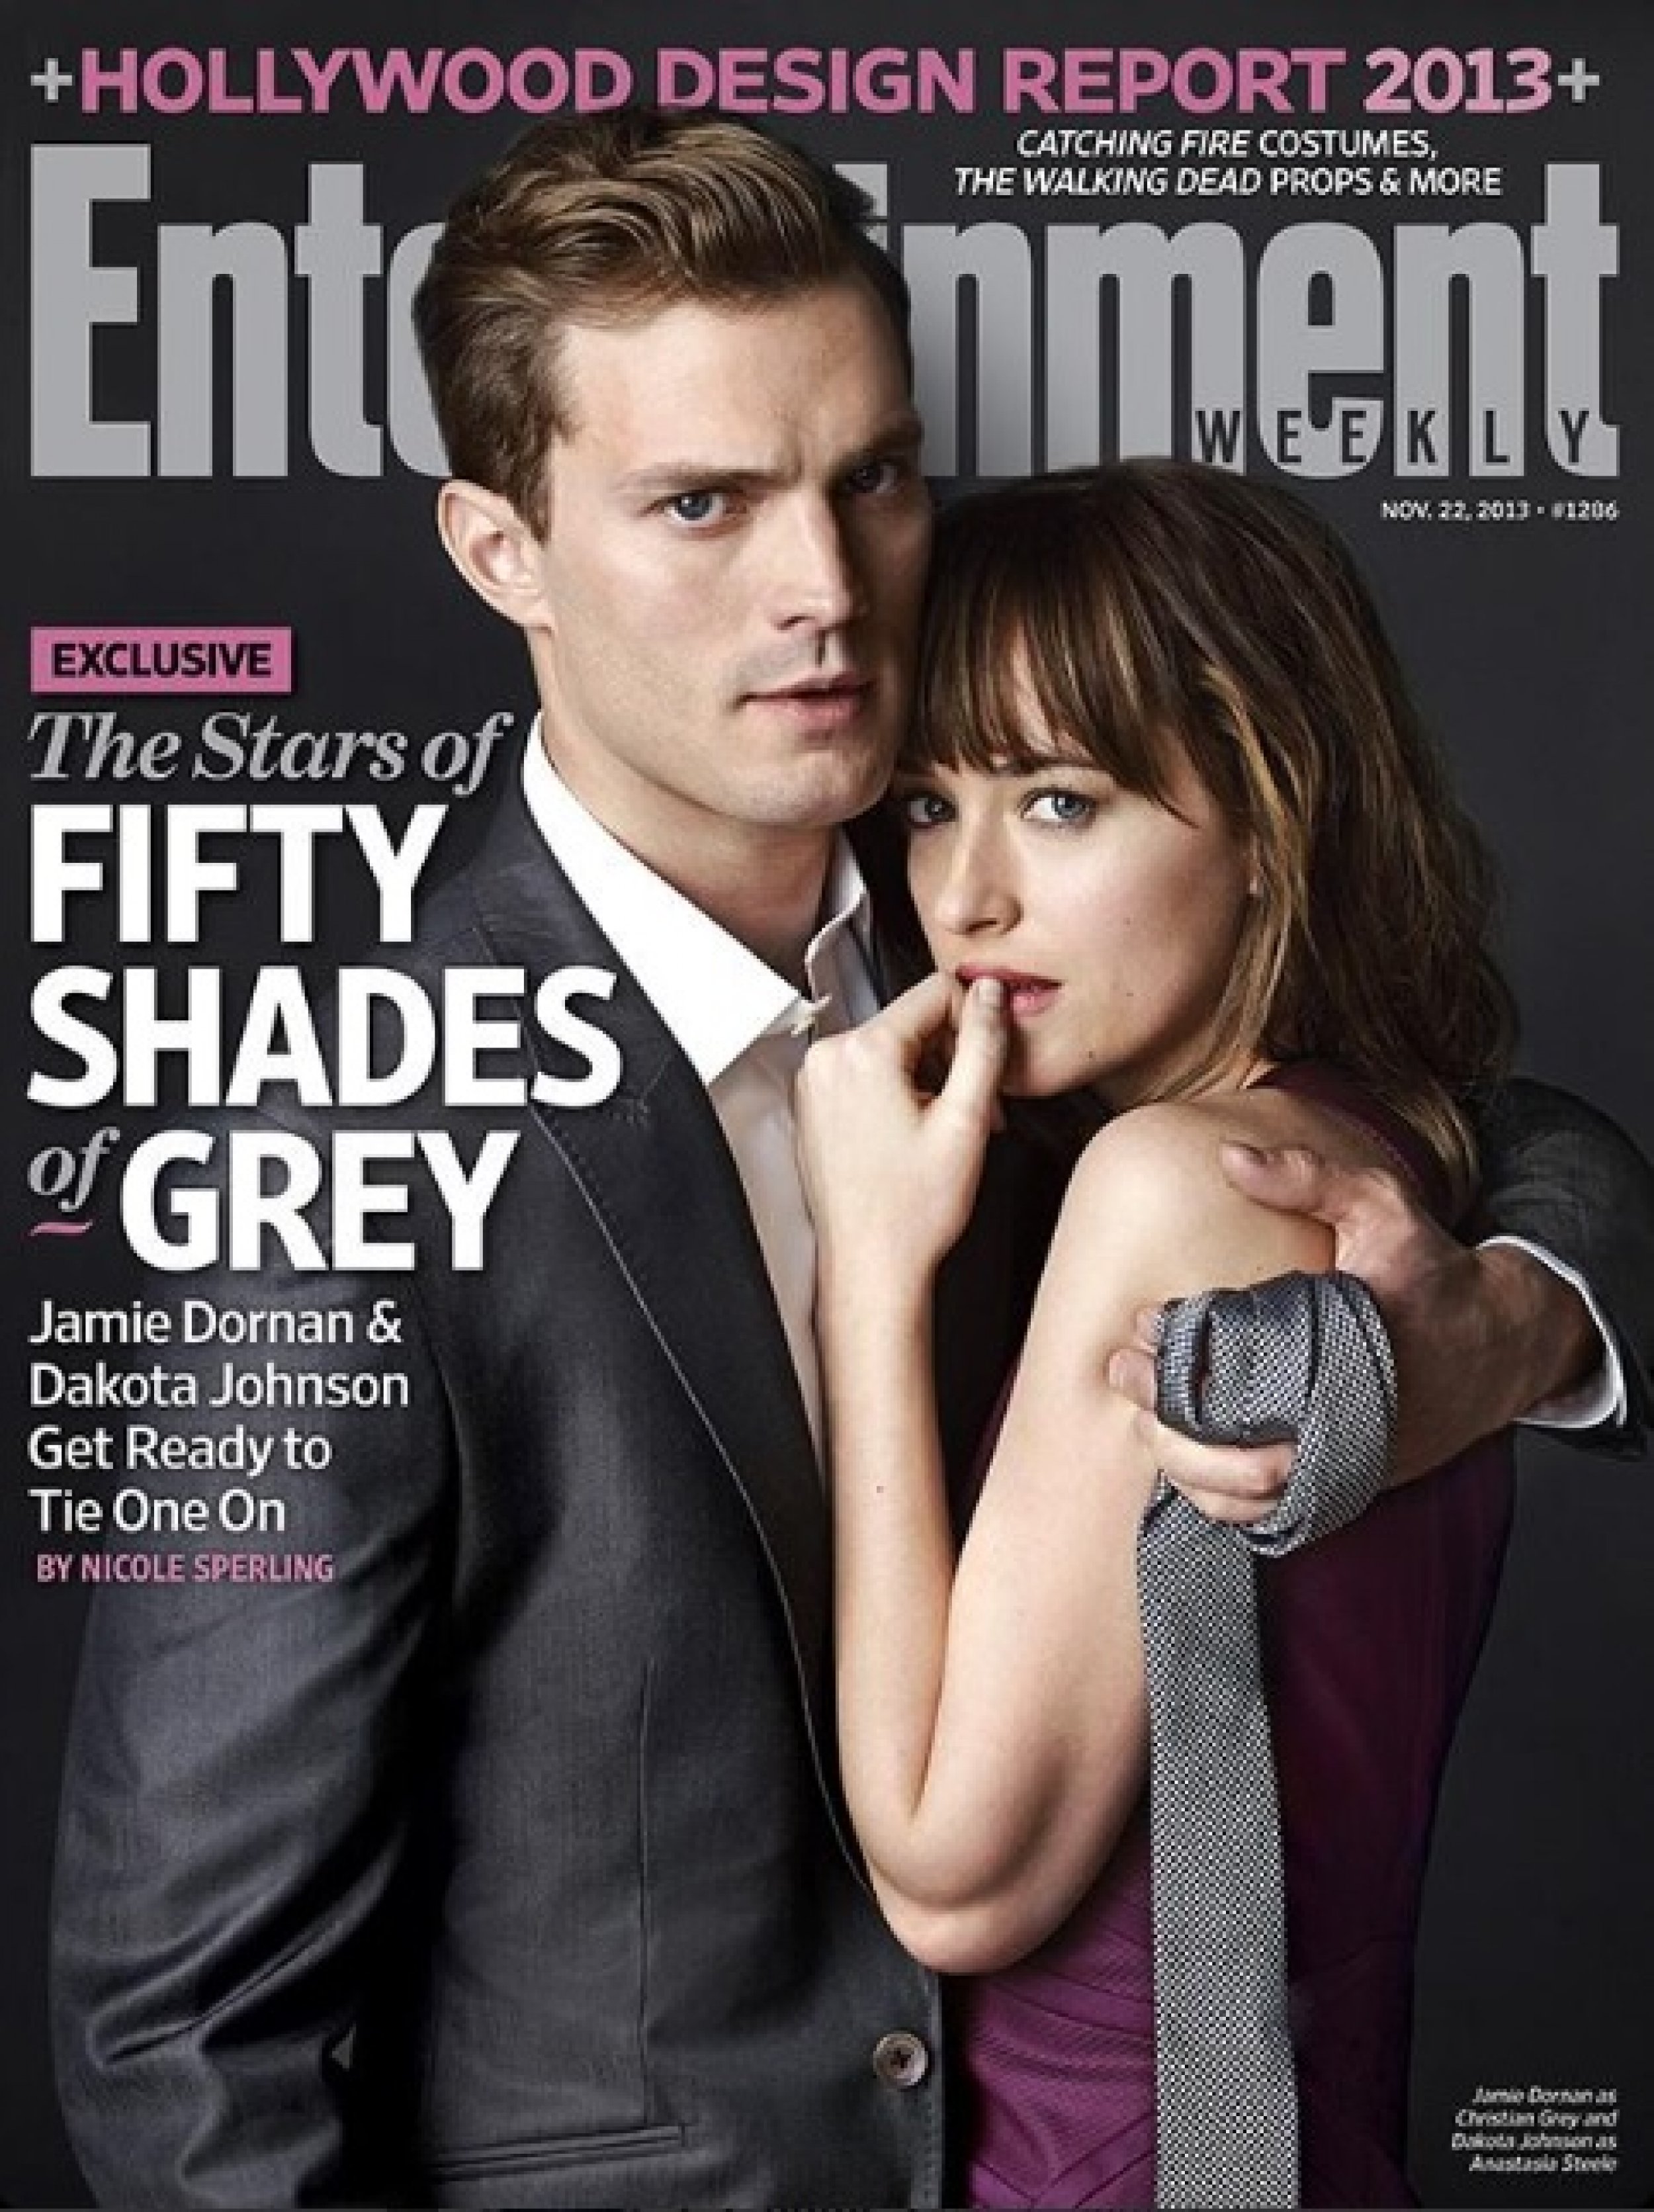 50 Shades Of Grey Movie Top 3 Christian Grey Anastasia Steele Sex Scenes From The Book That